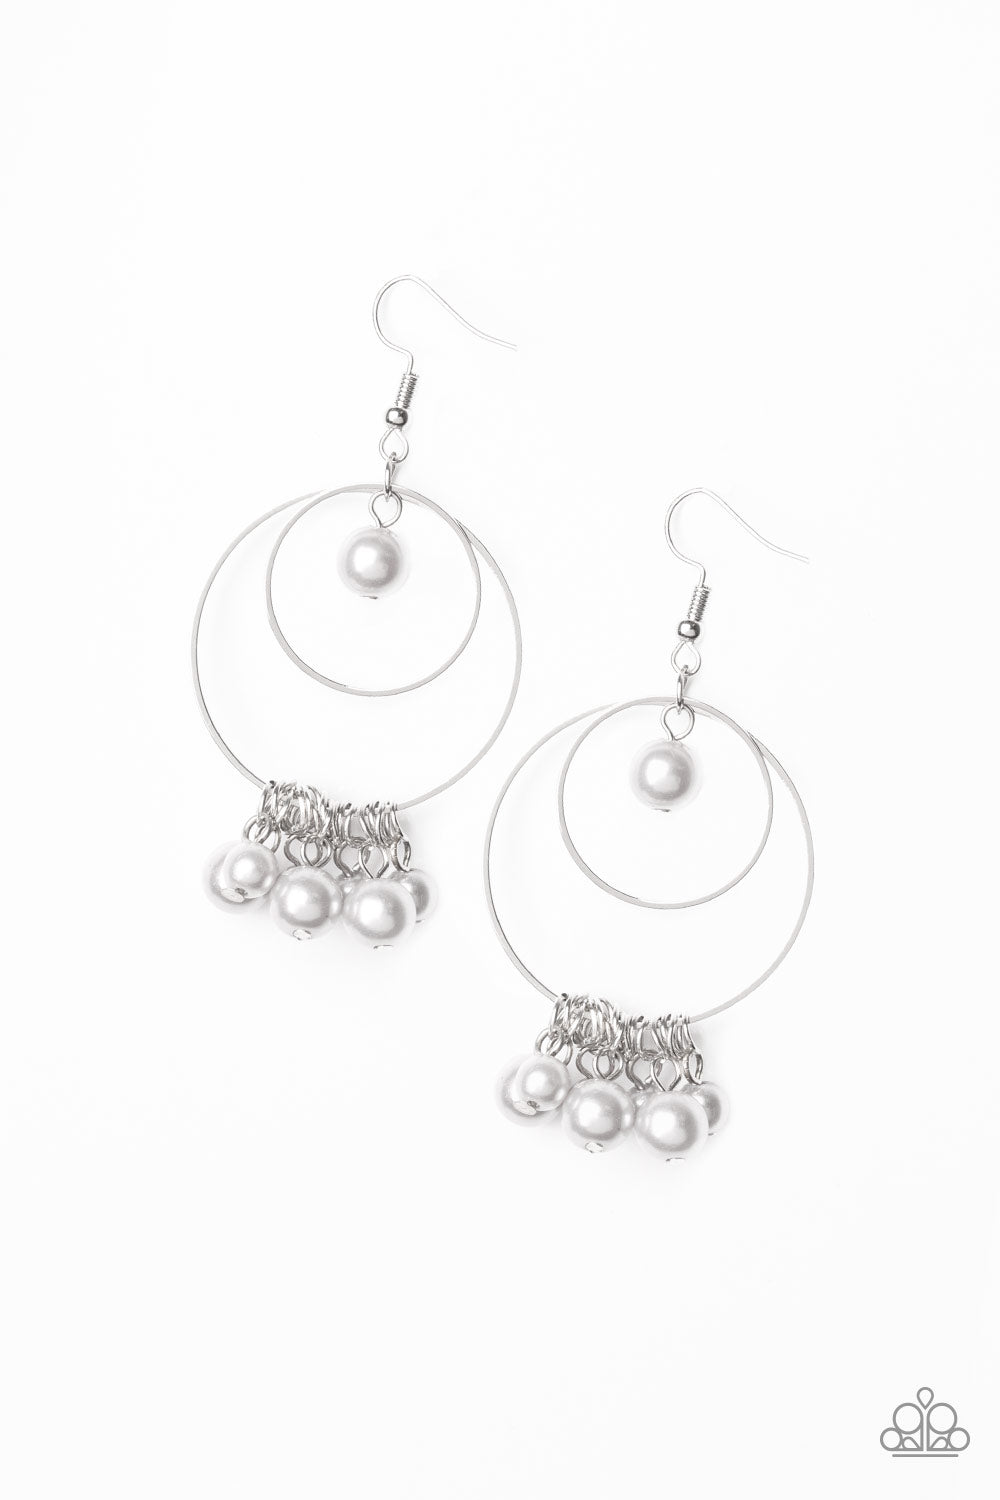 Paparazzi Earrings - New York Attraction - Silver